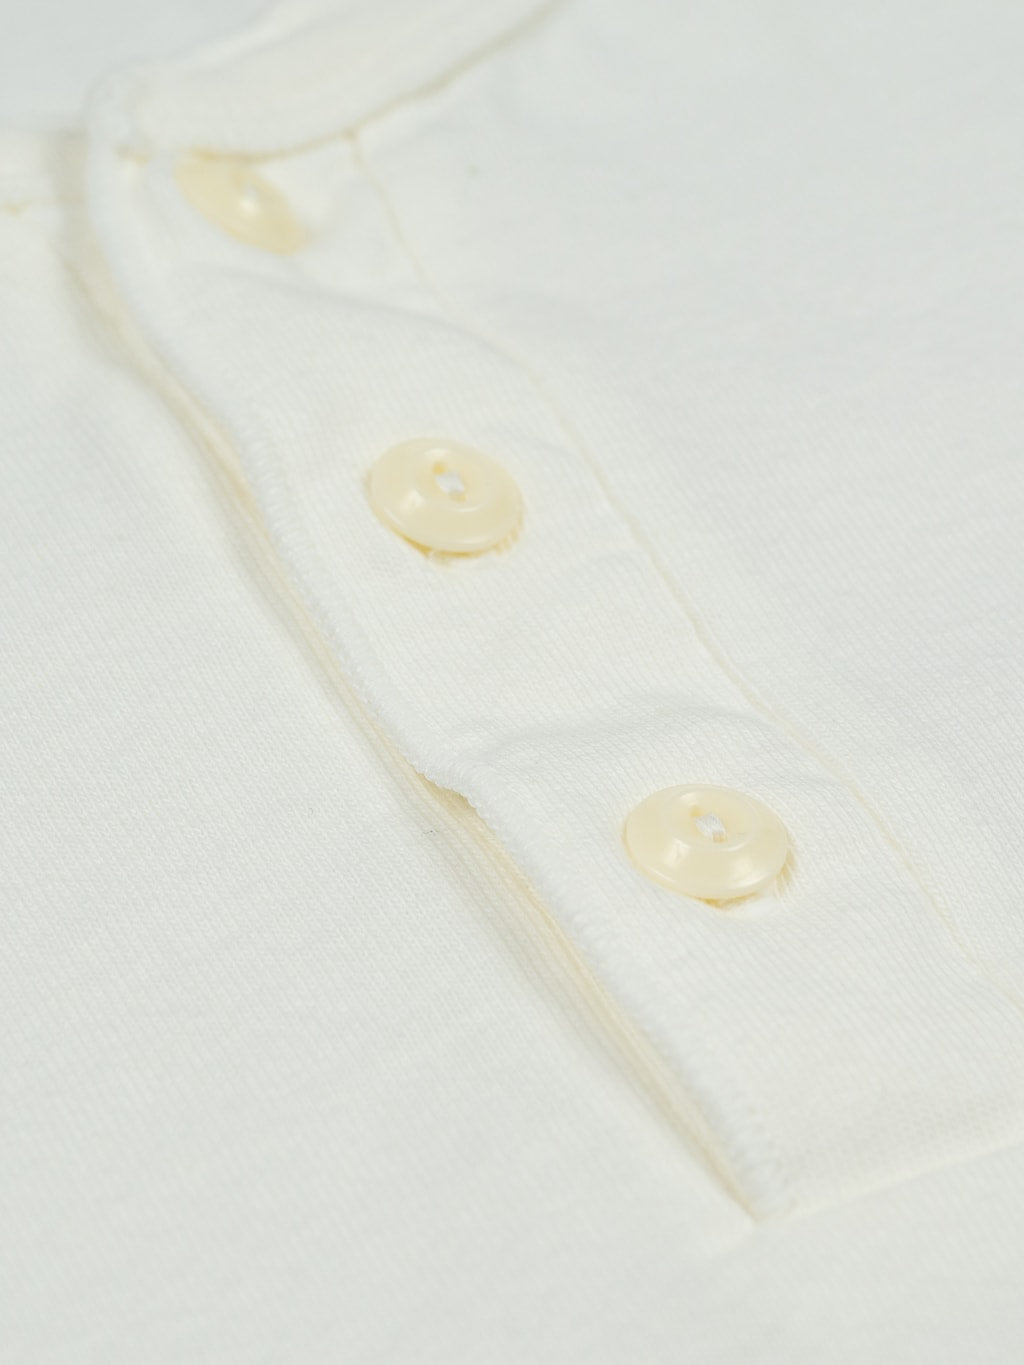 Ues ramayana henley neck tshirt white buttons detail